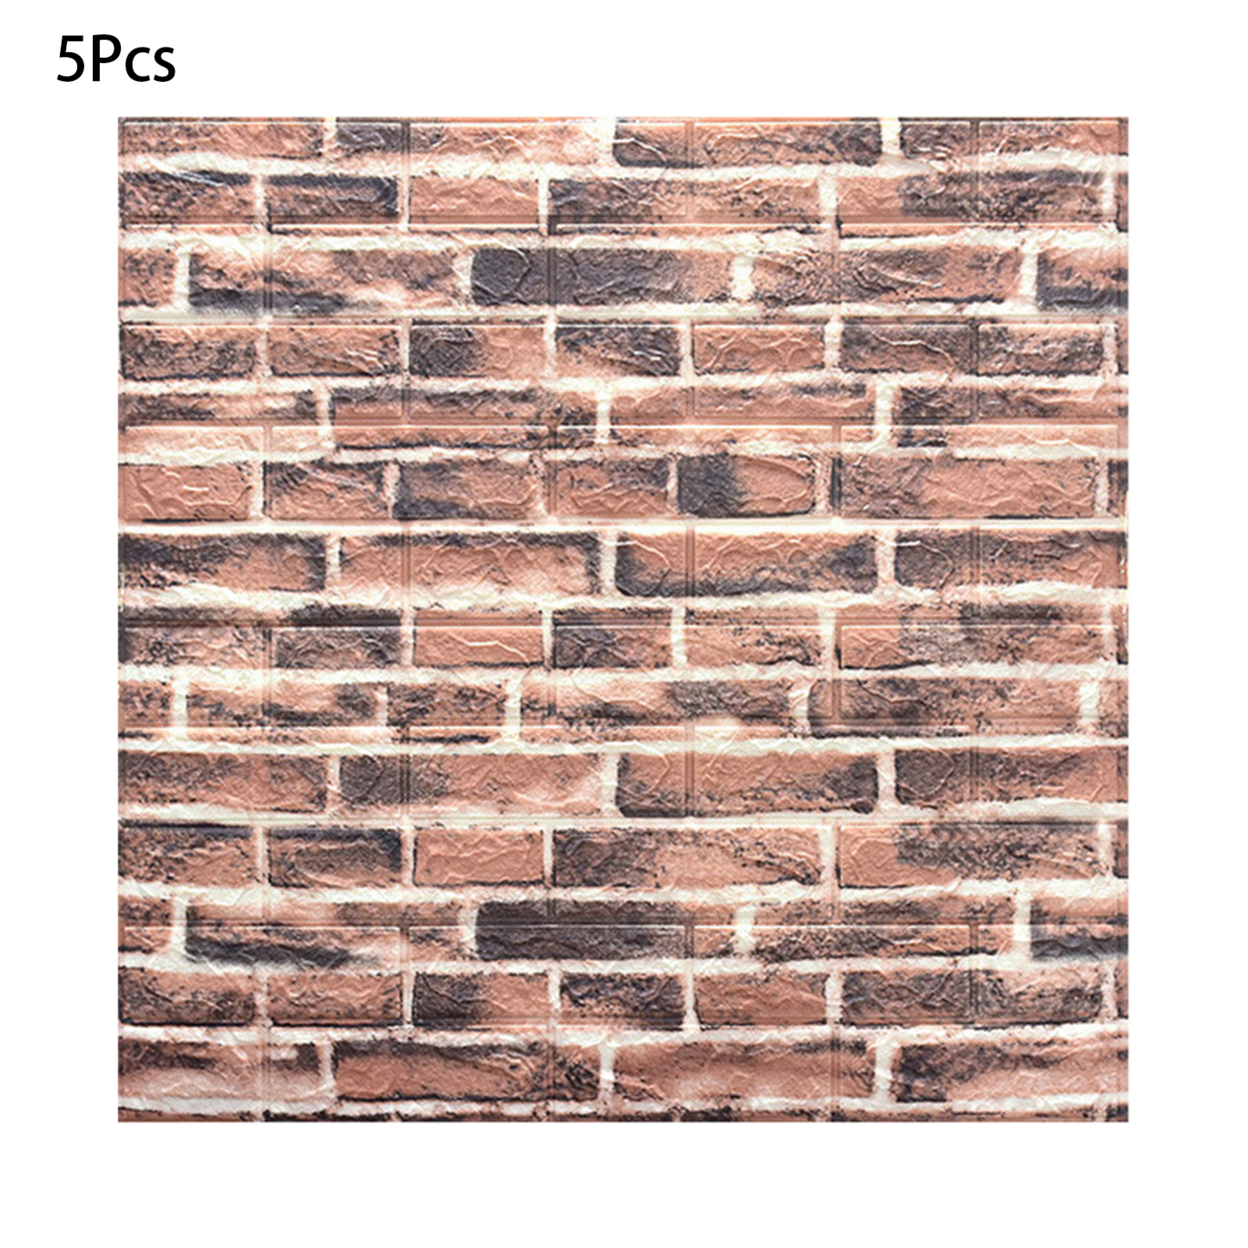 5Pcs Wall Stickers Lightweight Nice-looking Convenient 3D Wall Decals Brick Pattern Wallpapers for Home - brick red